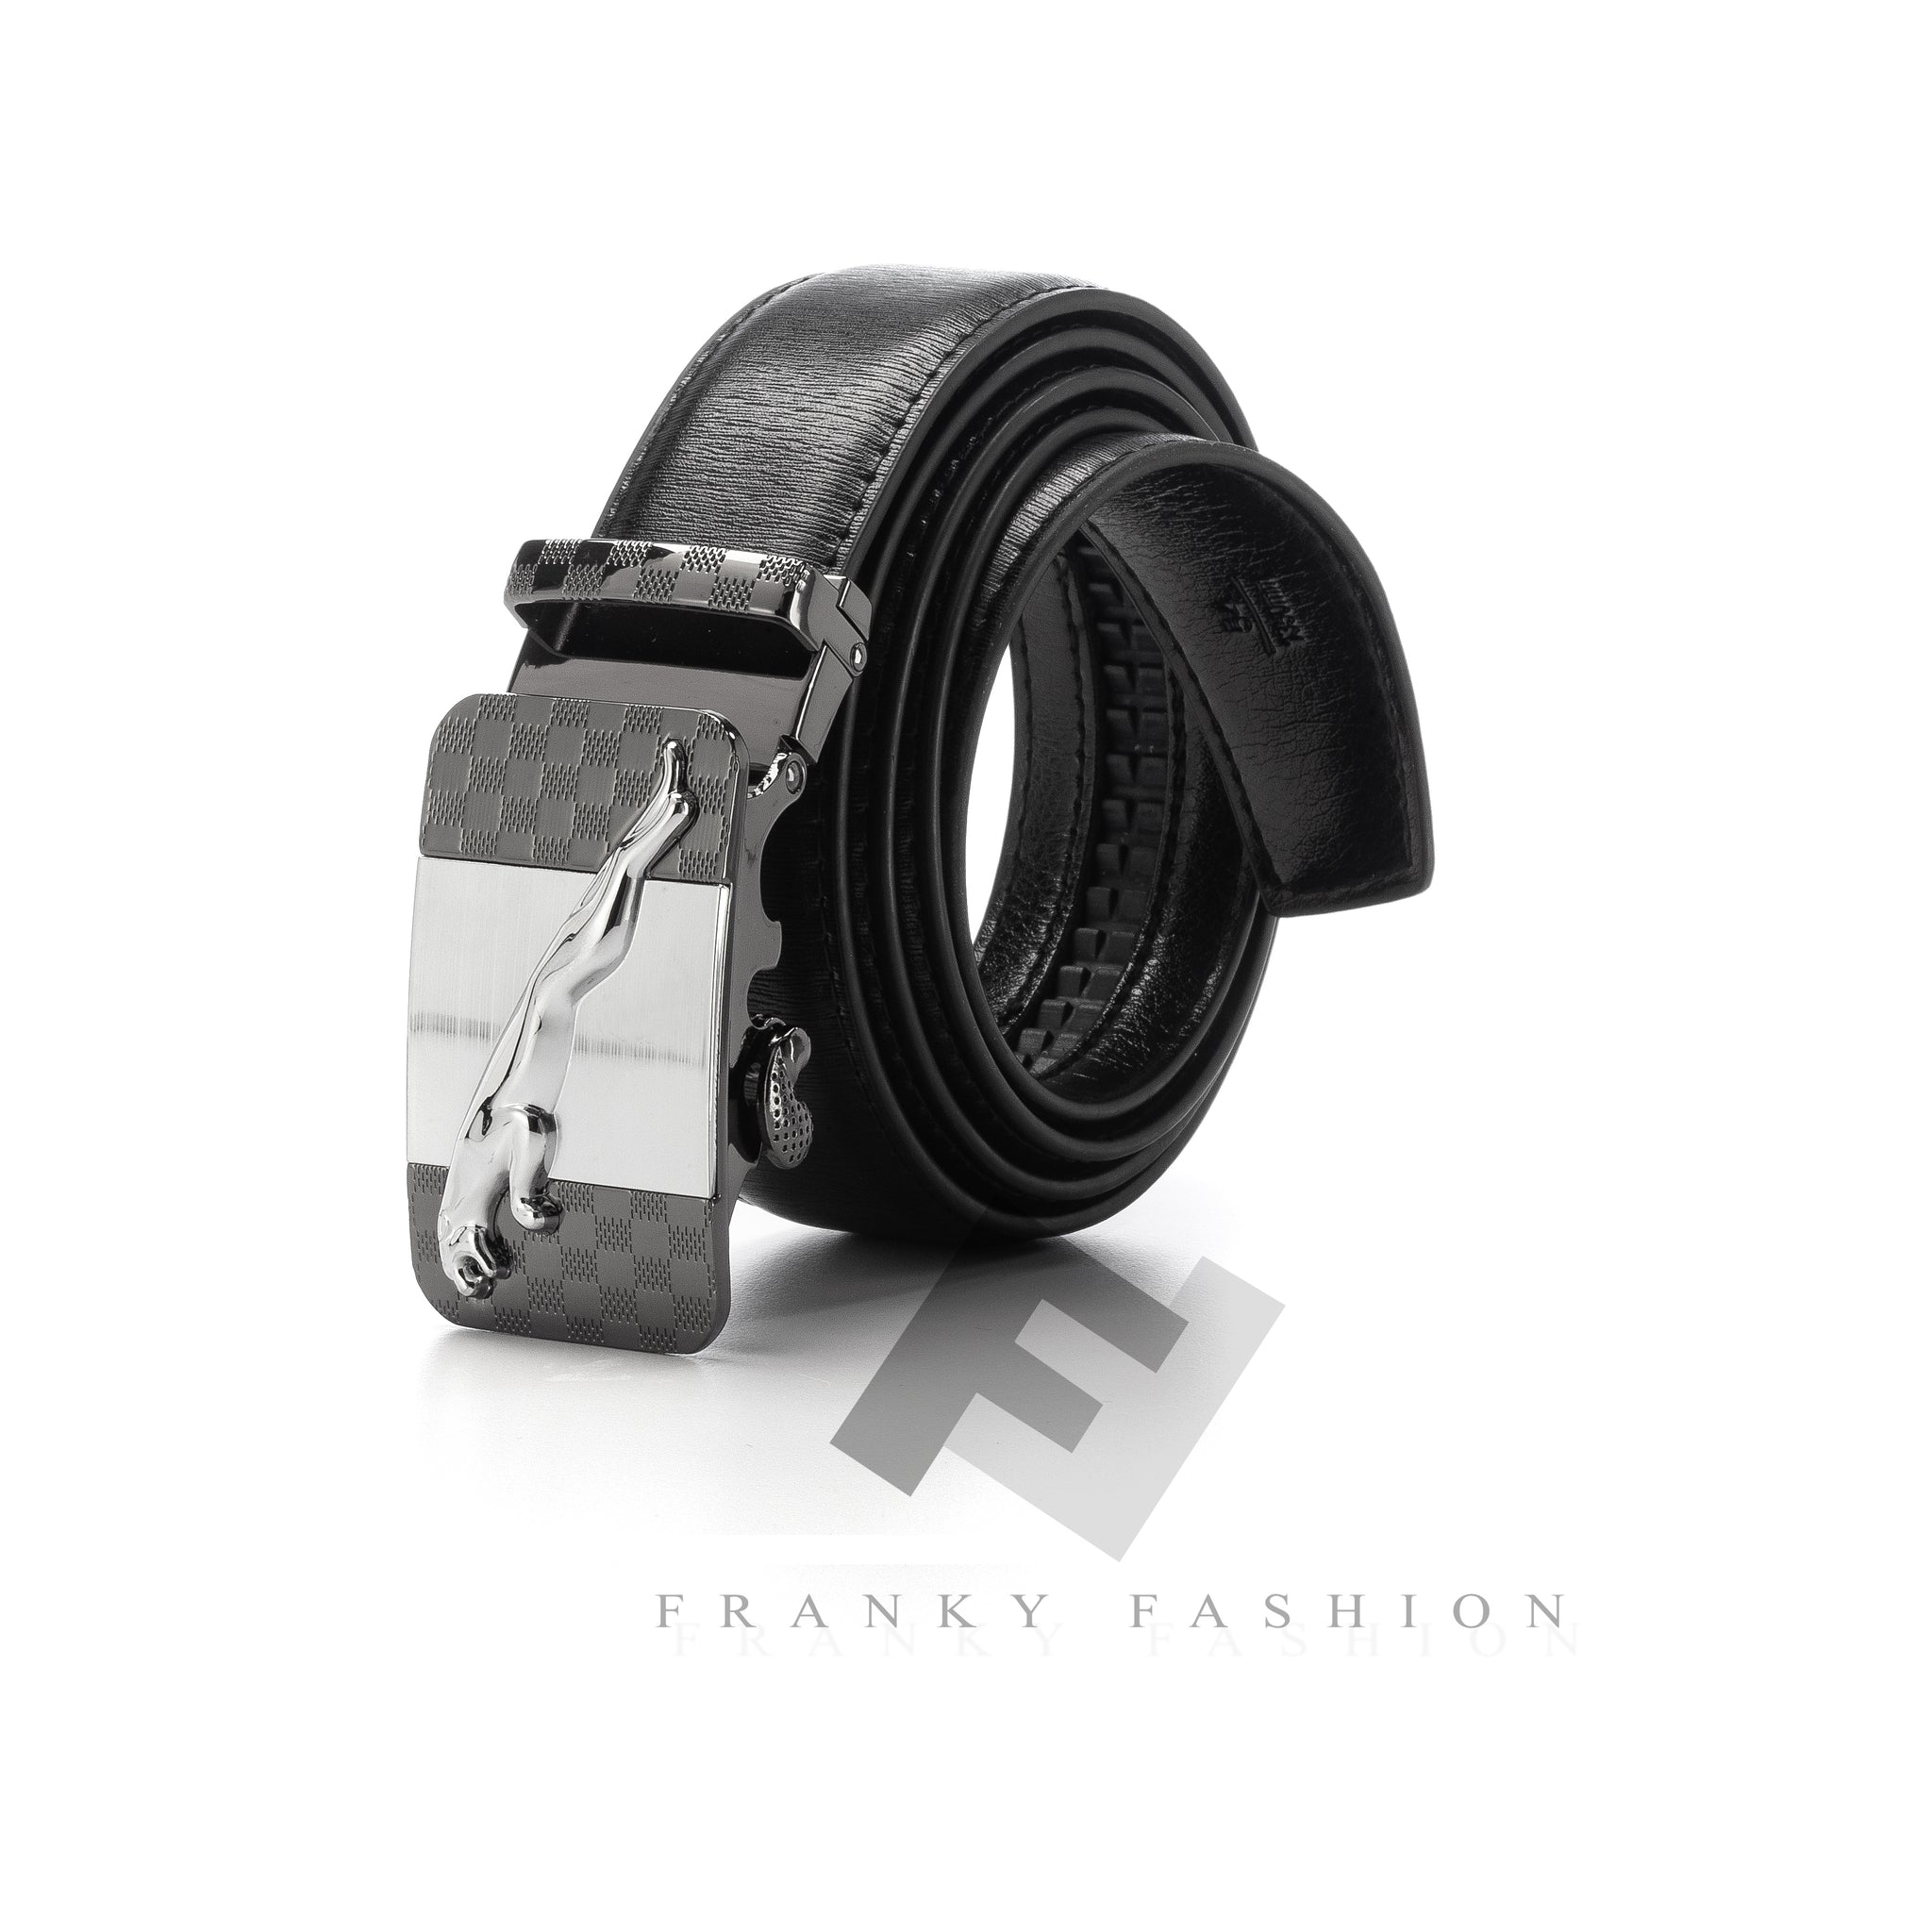 Men's Checkered Cougar Style Track Belt